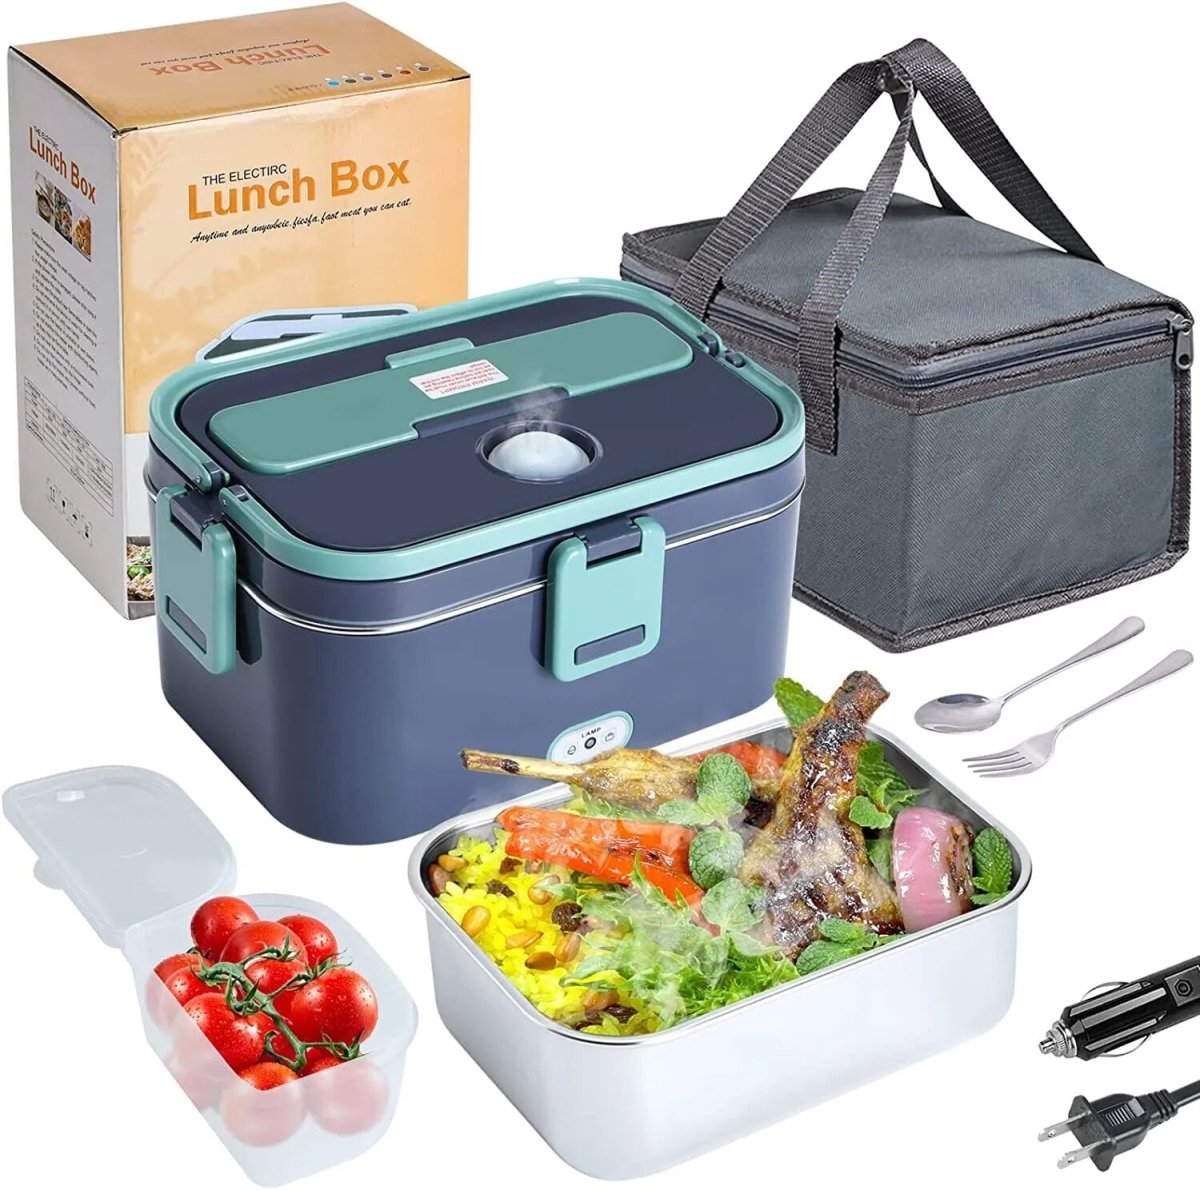 Portable Insulated Electric Heated Lunch Box - Sweet Sentimental GiftsPortable Insulated Electric Heated Lunch BoxExtrasInnovationSweet Sentimental Gifts39701877-EU-plugPortable Insulated Electric Heated Lunch BoxEU plug883989103579